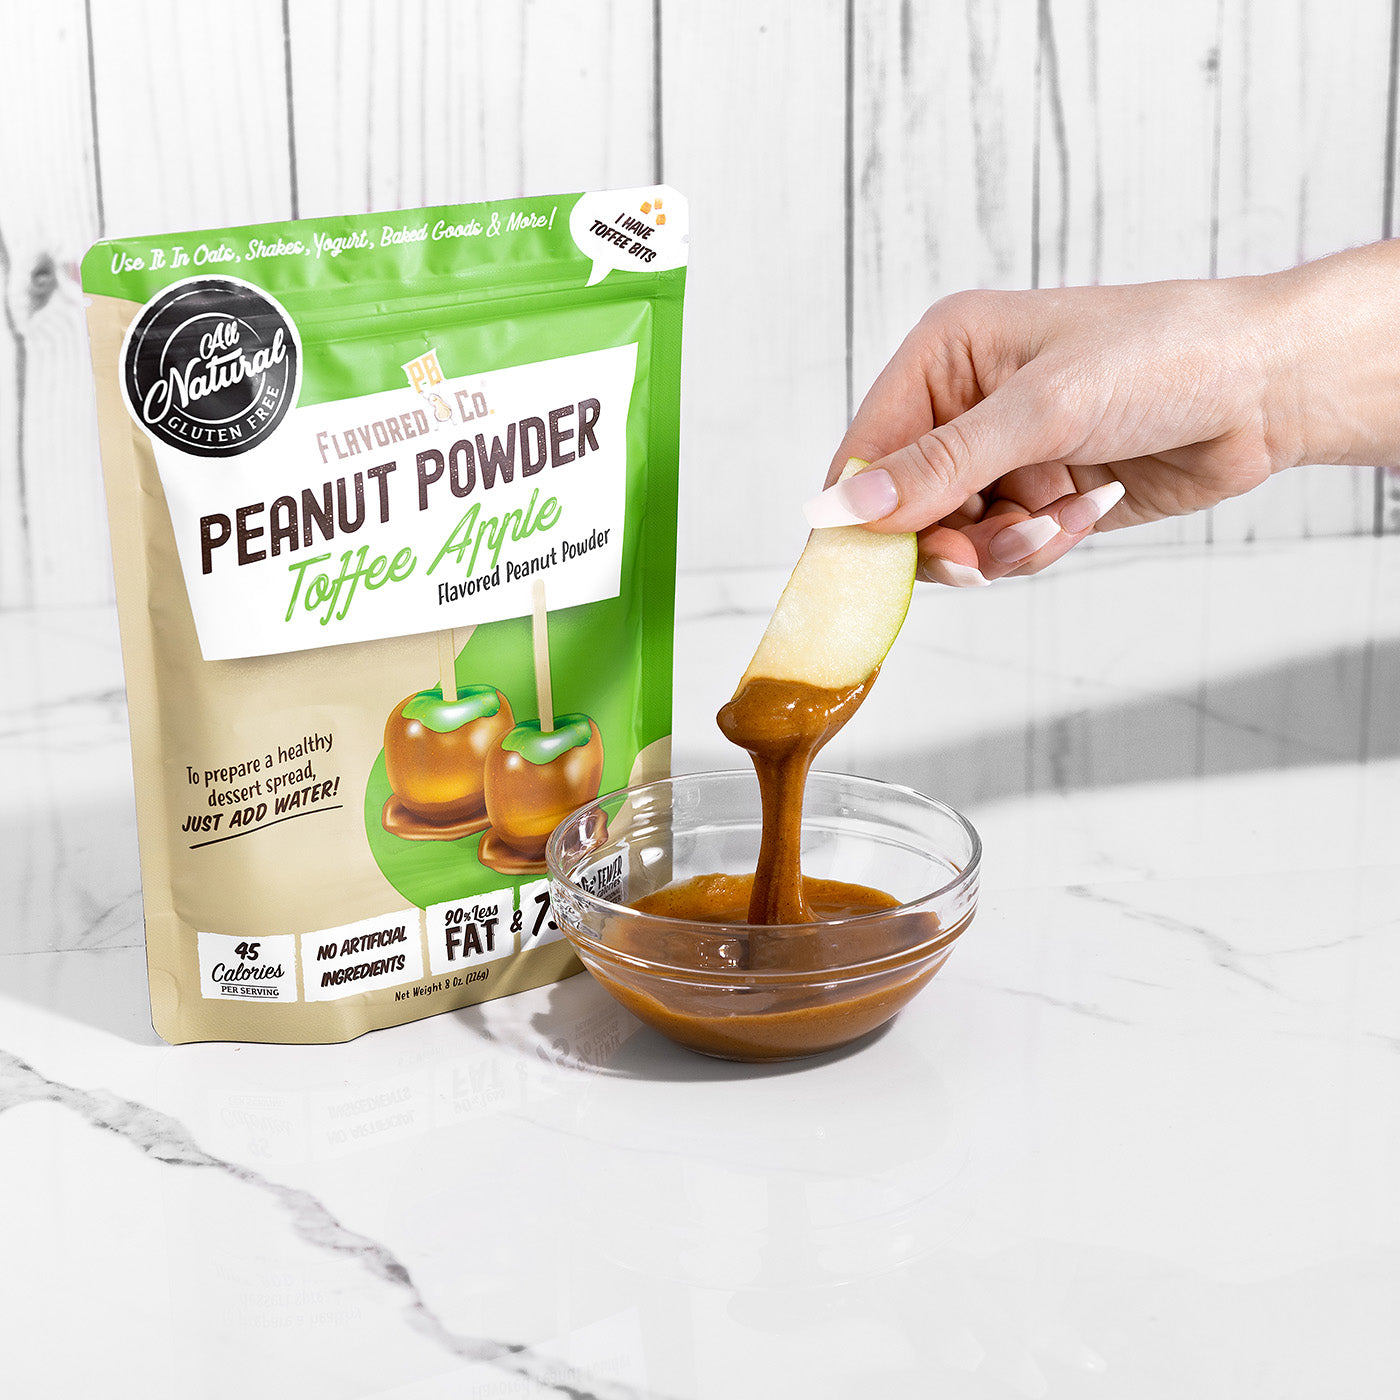 dipping apples in Flavored PBco toffee apple peanut powder